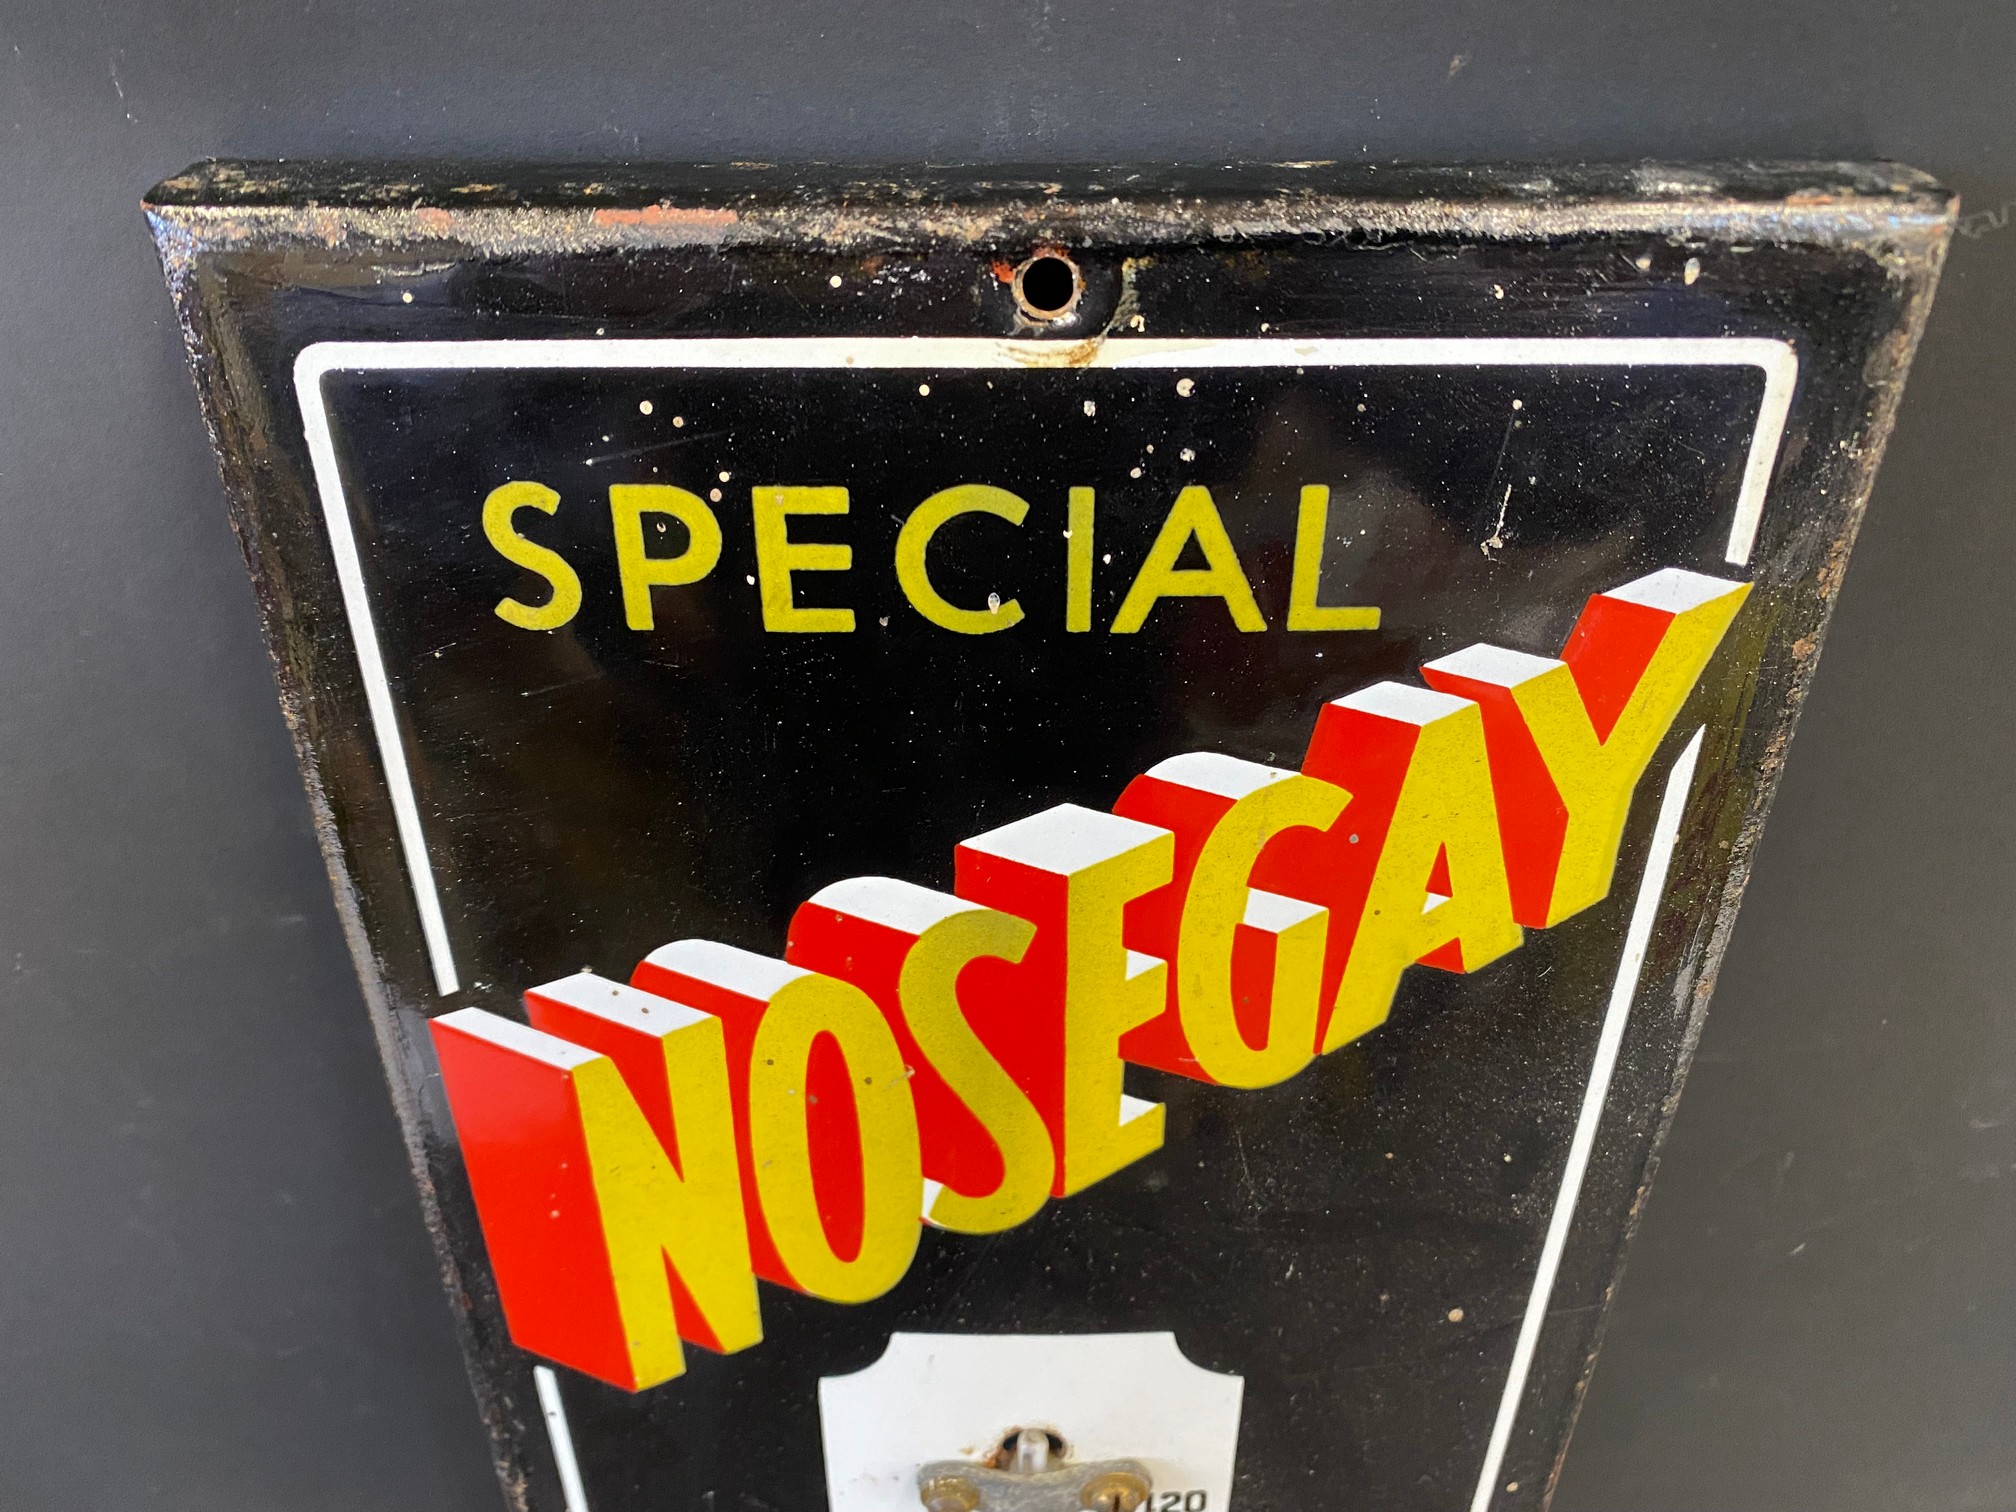 A Nosegay Cigarettes enamel thermometer, 7 1/2 x 22 1/2". - Image 2 of 5